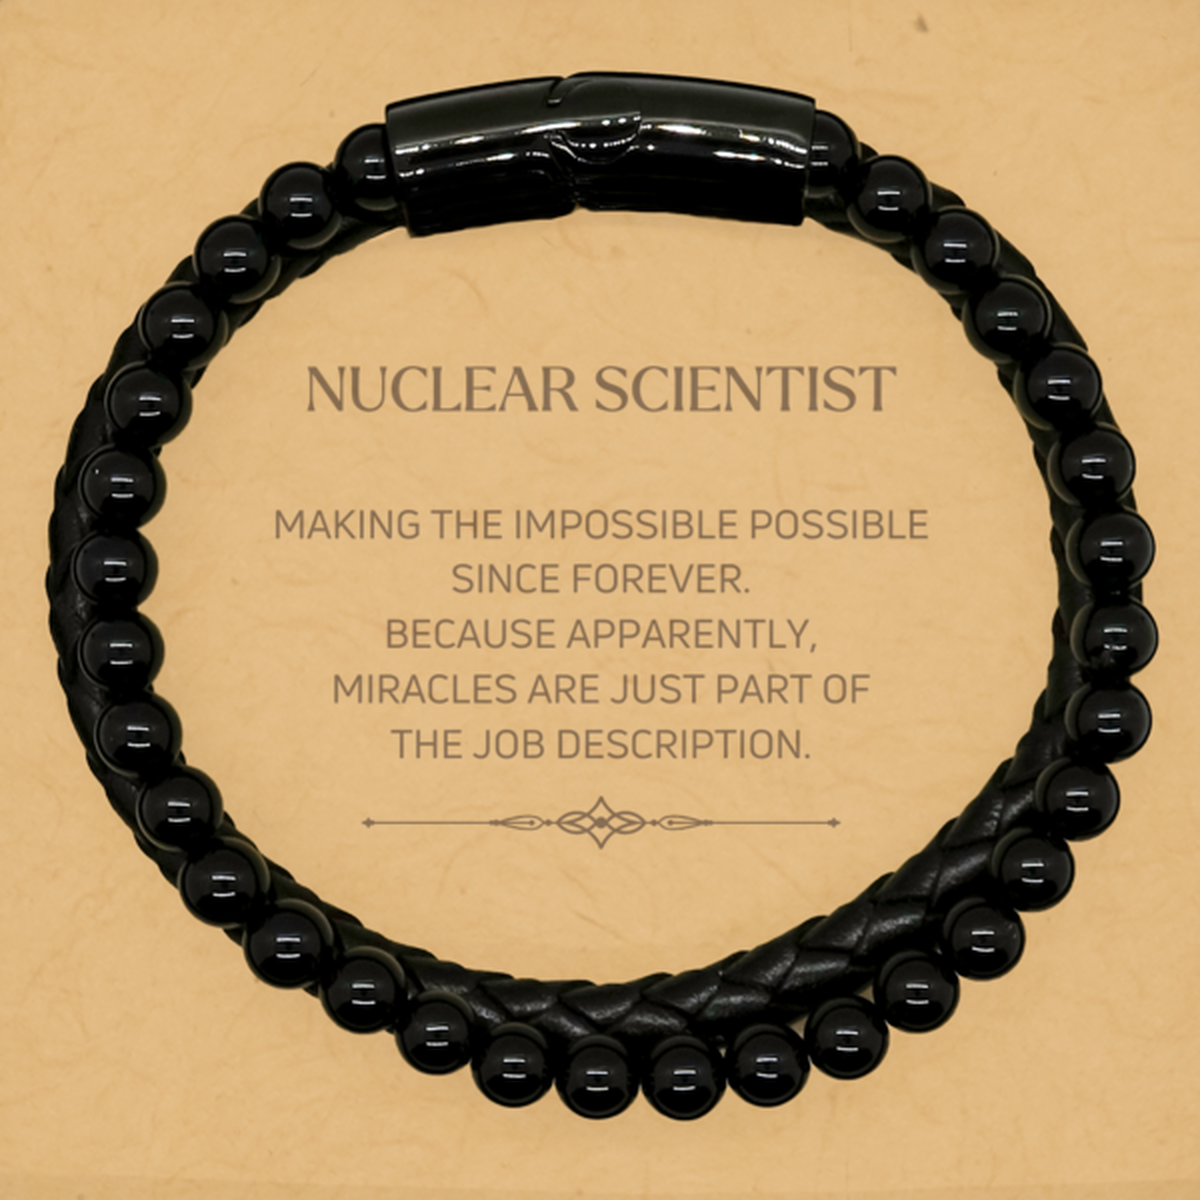 Funny Nuclear Scientist Gifts, Miracles are just part of the job description, Inspirational Birthday Stone Leather Bracelets For Nuclear Scientist, Men, Women, Coworkers, Friends, Boss